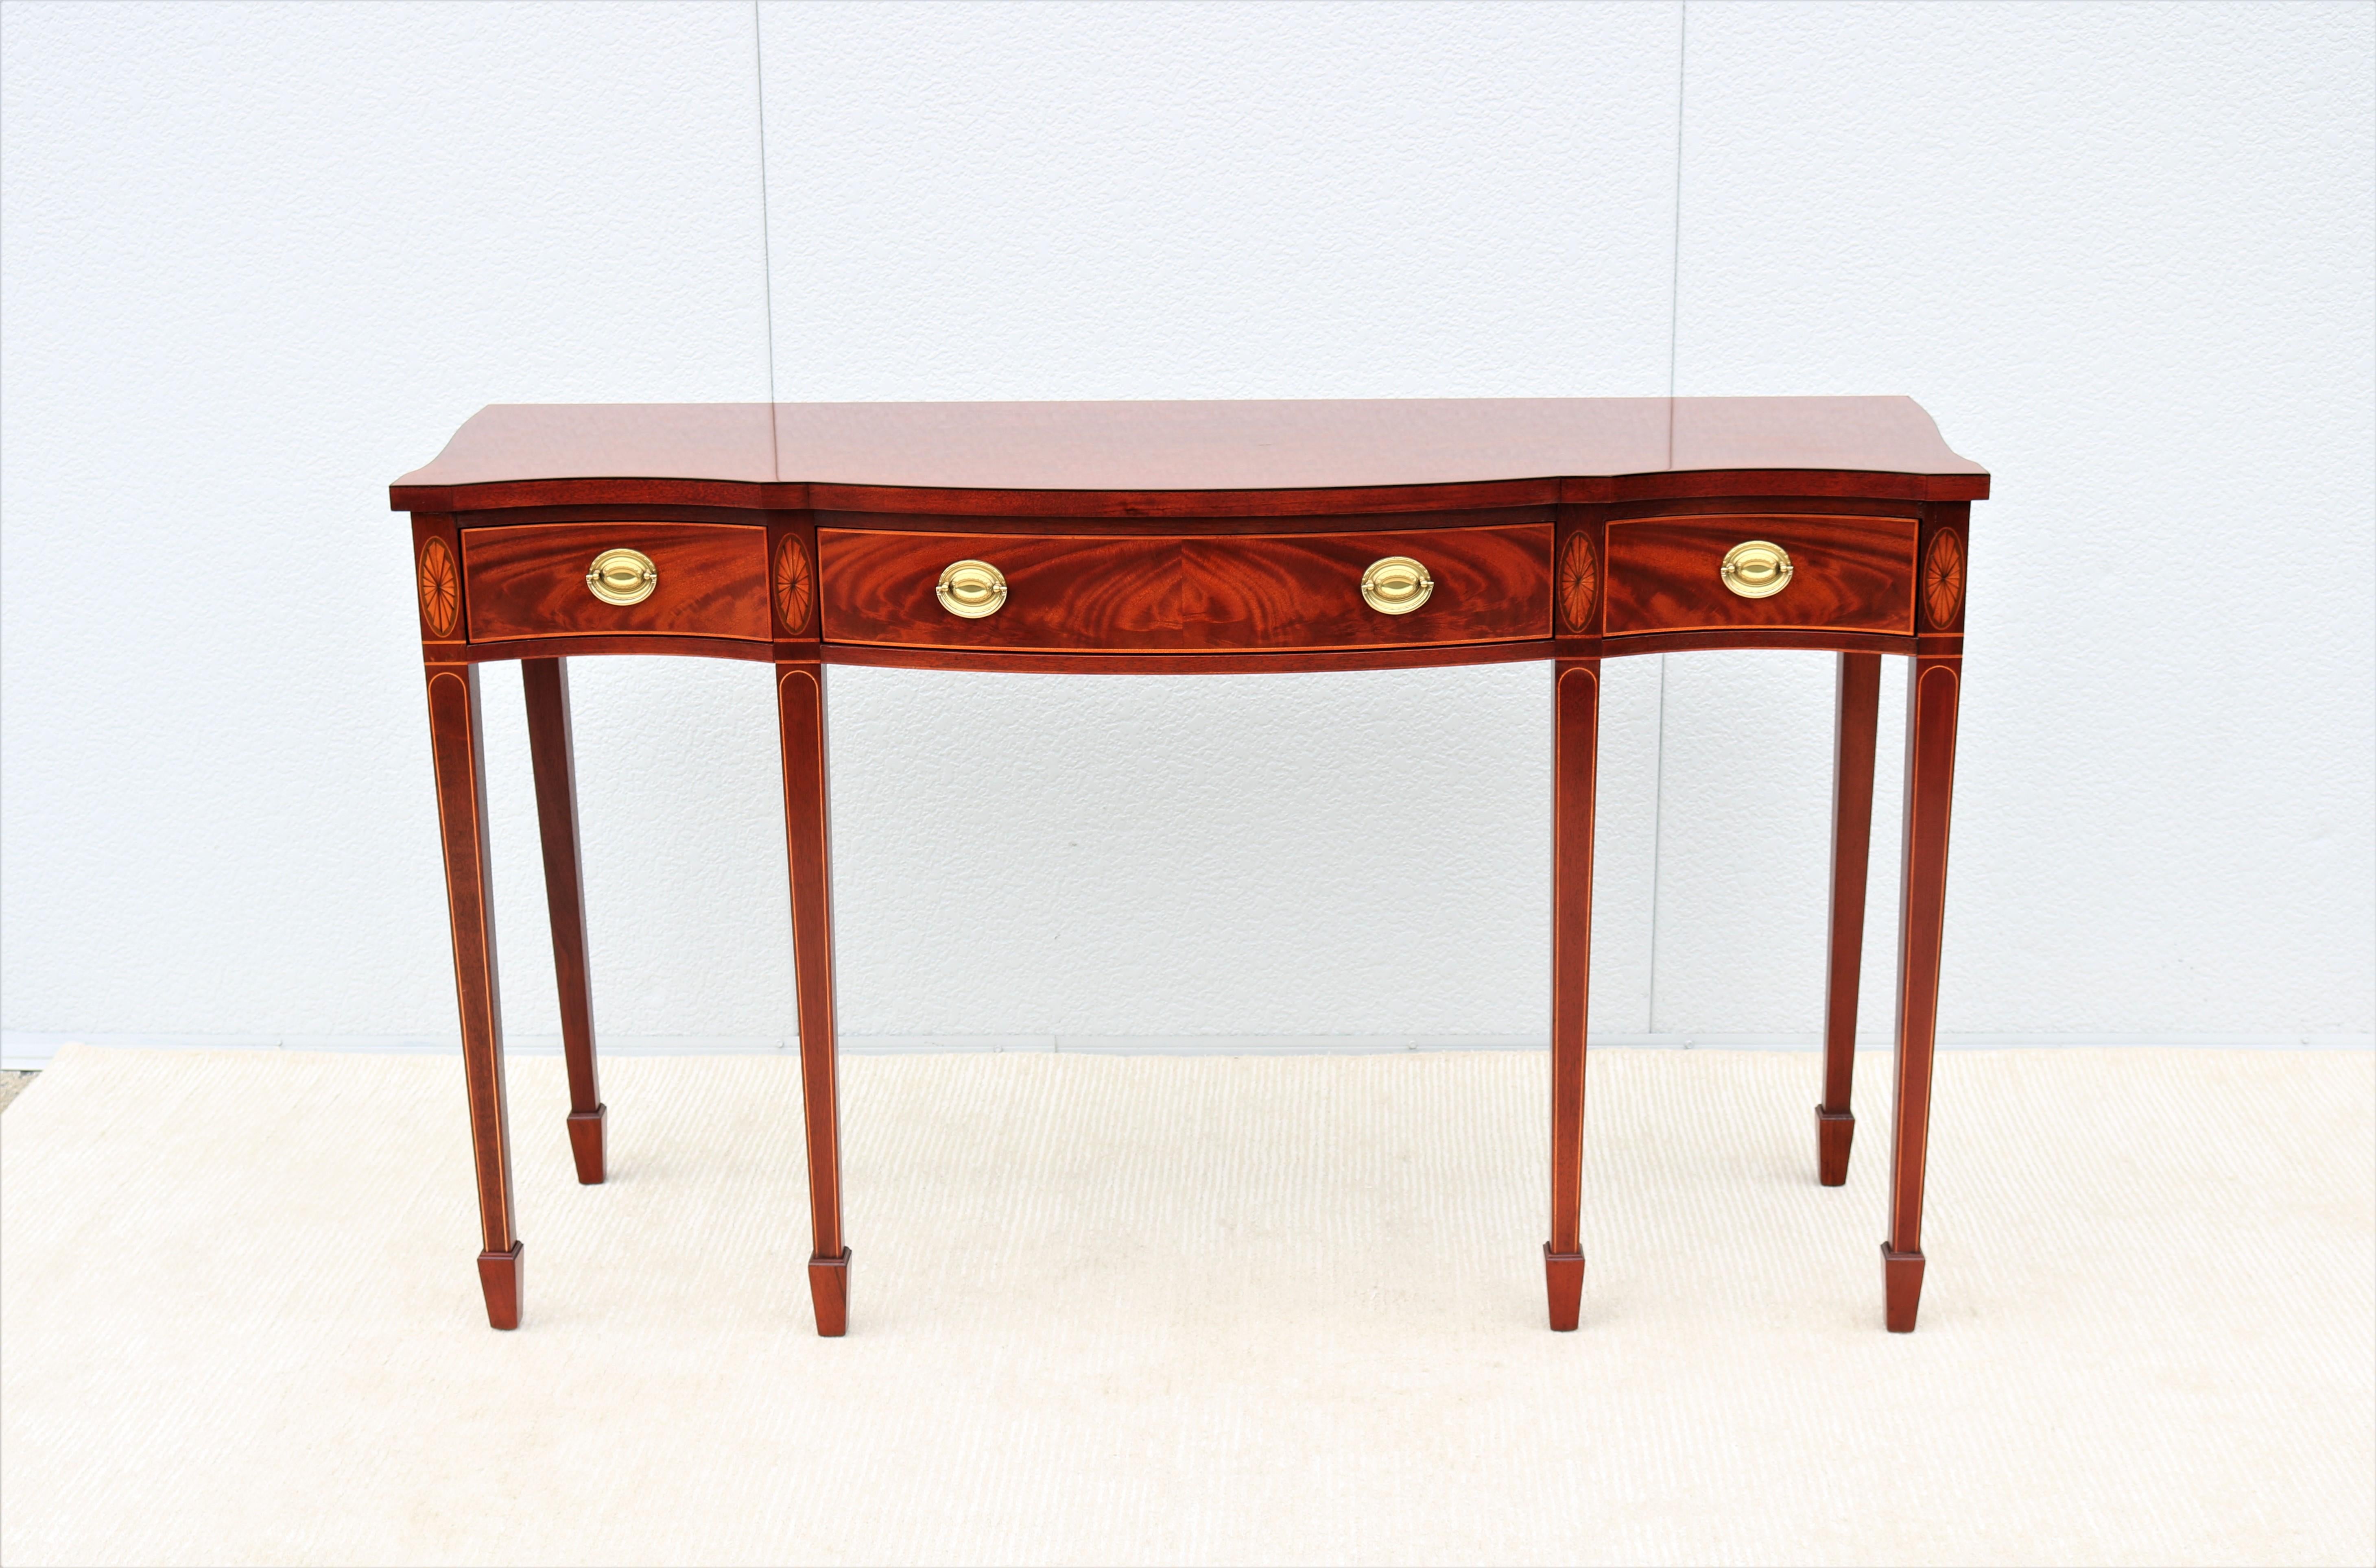 Fabulous traditional Baker Furniture Historic Charleston collection mahogany Sheraton style Serpentine sideboard.
A classic timeless and luxurious style inspired by the 18th and 19th century design.
The Baker furniture company produces the world's